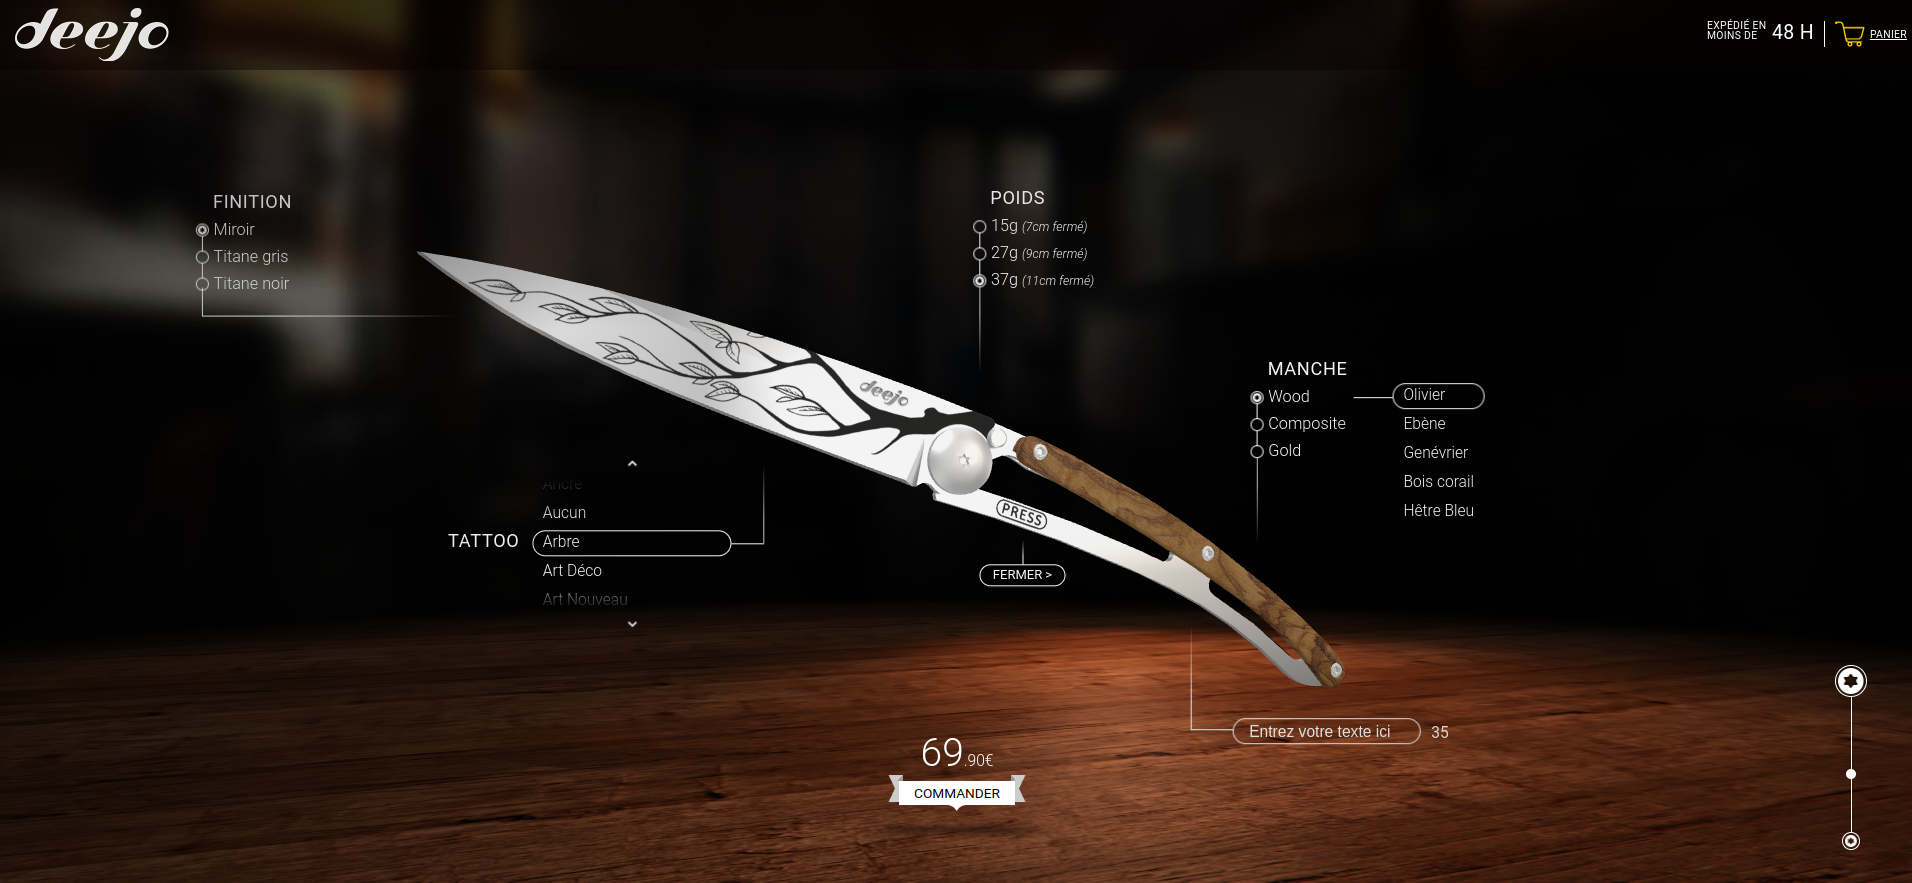 On the Deejo ecommerce website, the user can customize their own knife